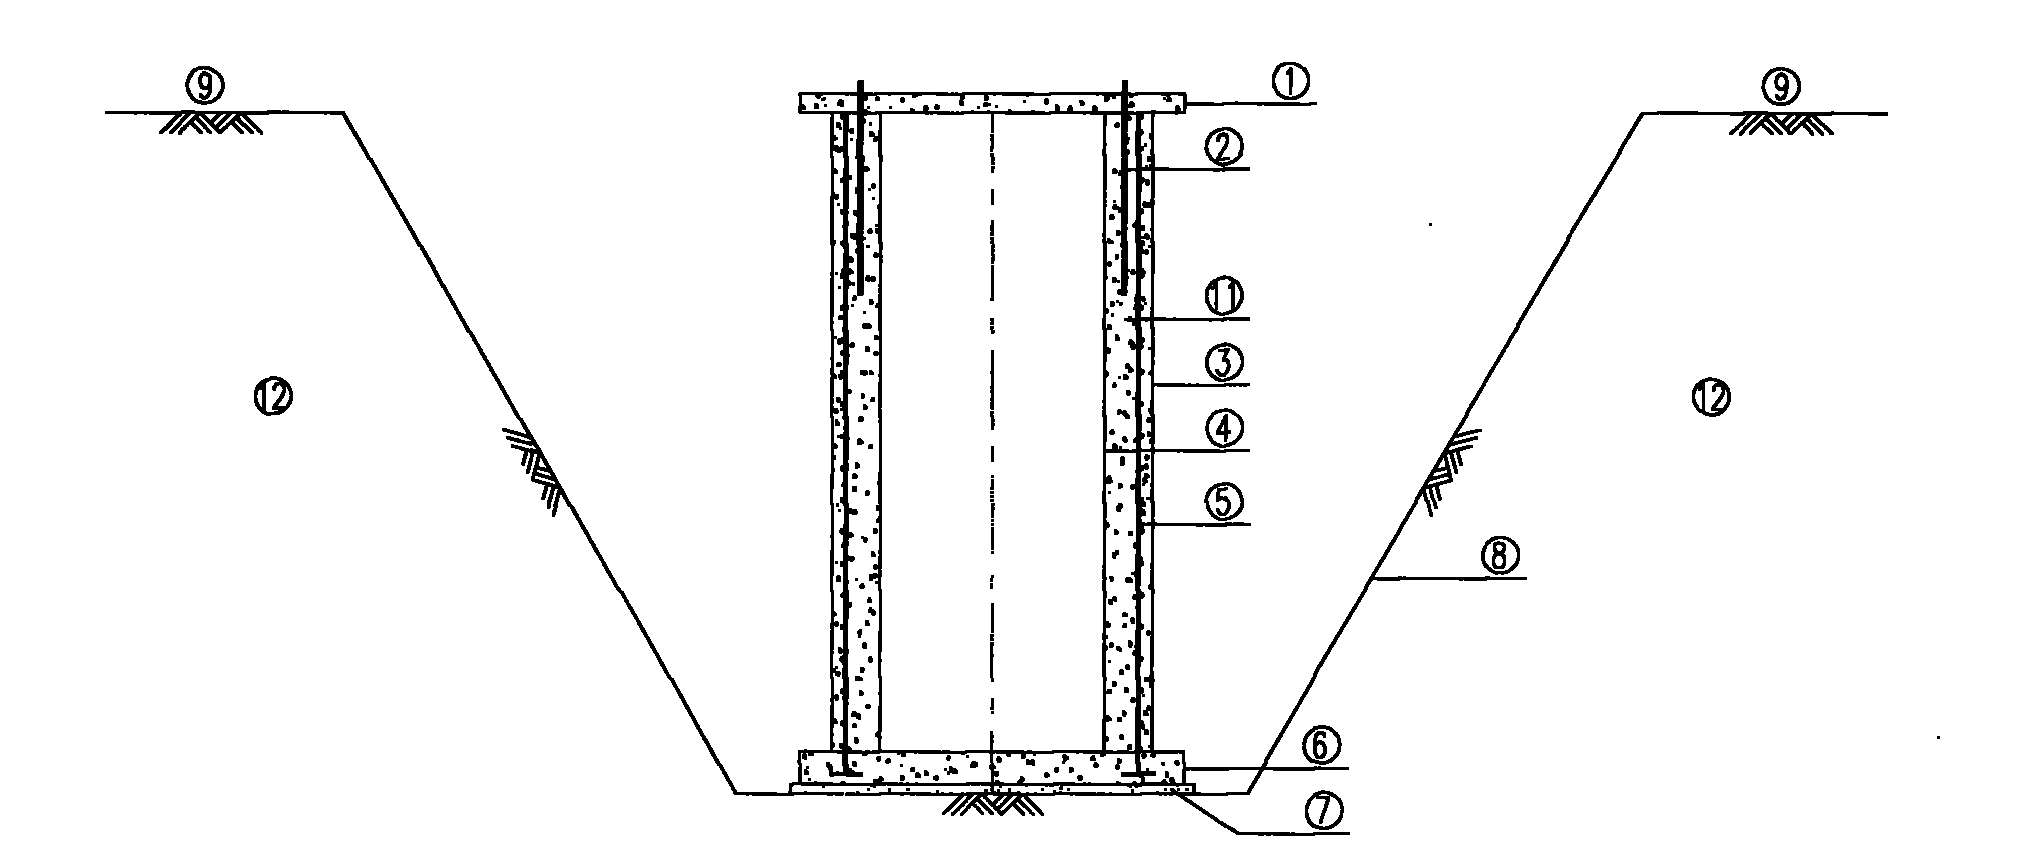 Two-ring grouted single pile foundation